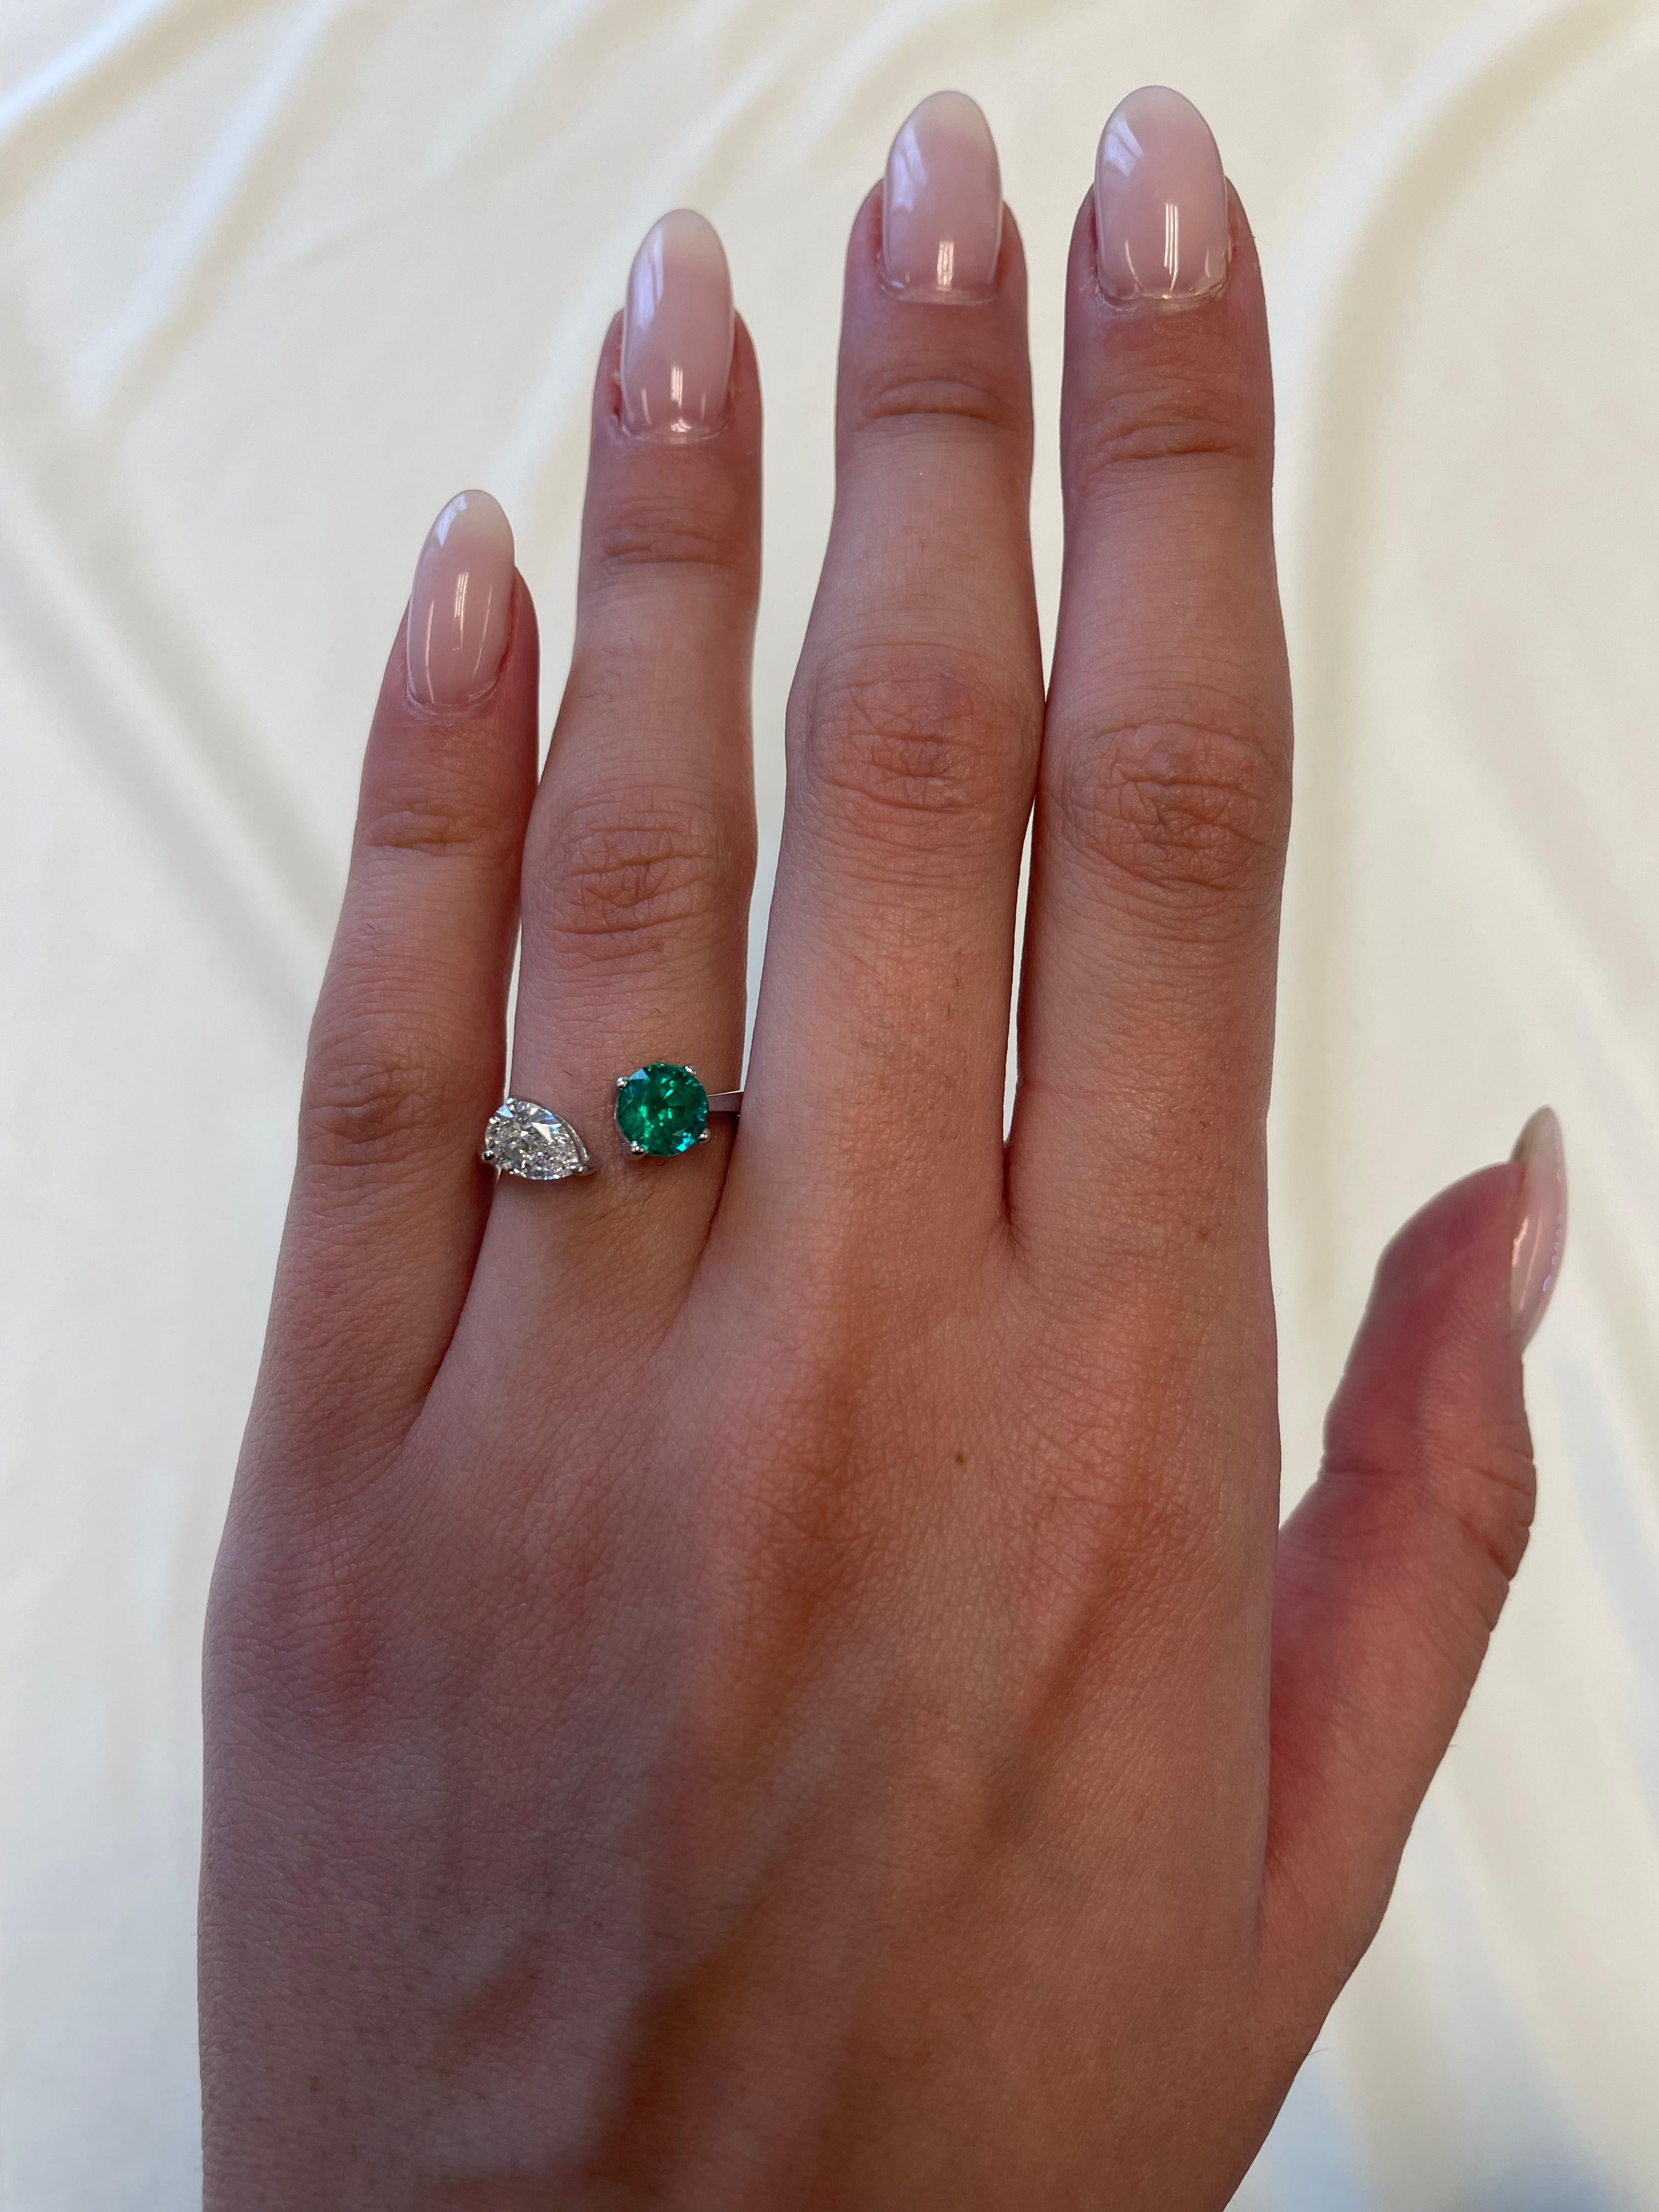 Stunning modern floating emerald and diamond toi et moi ring. By Alexander Beverly Hills.
1.42 carats total gemstone weight.
0.89 carat round shape emerald. 0.53 carat pear shape diamond, approximately G/H color, and SI clarity. 18-karat white gold,